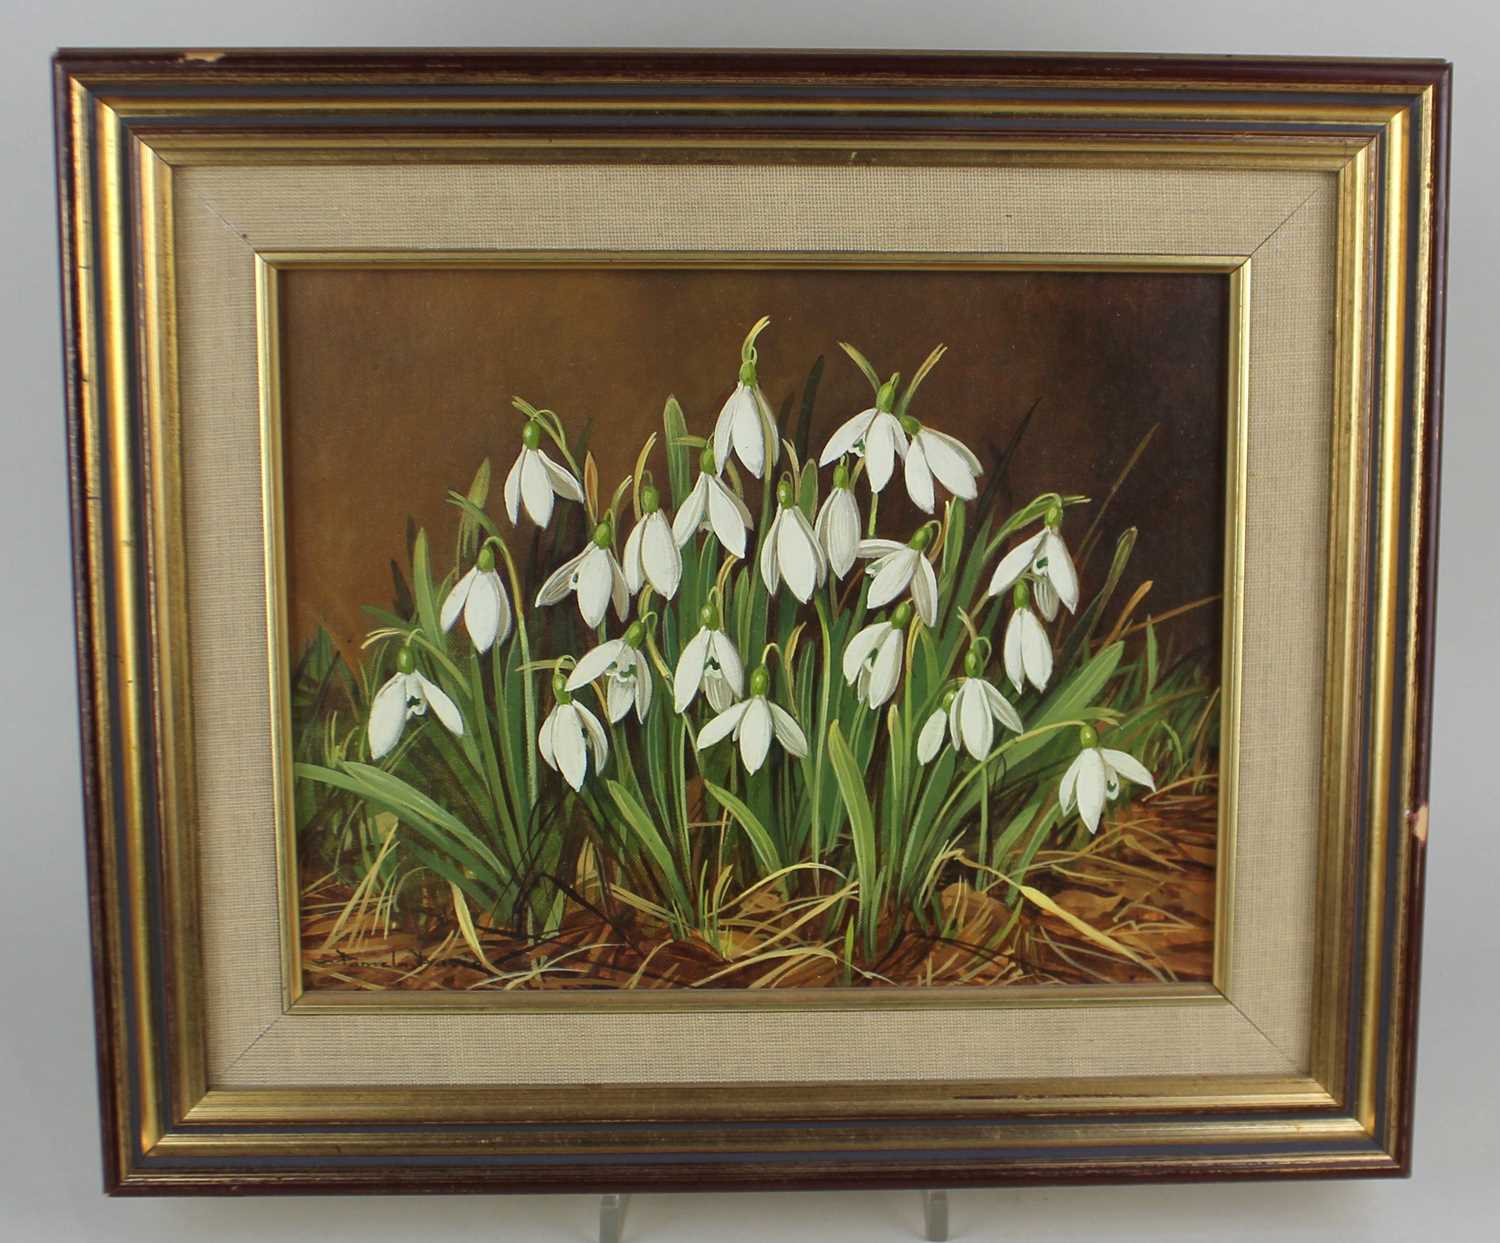 Pamela Davis, snowdrops, oil on board, signed, 19cm by 24cm, with paper receipt from the Crane